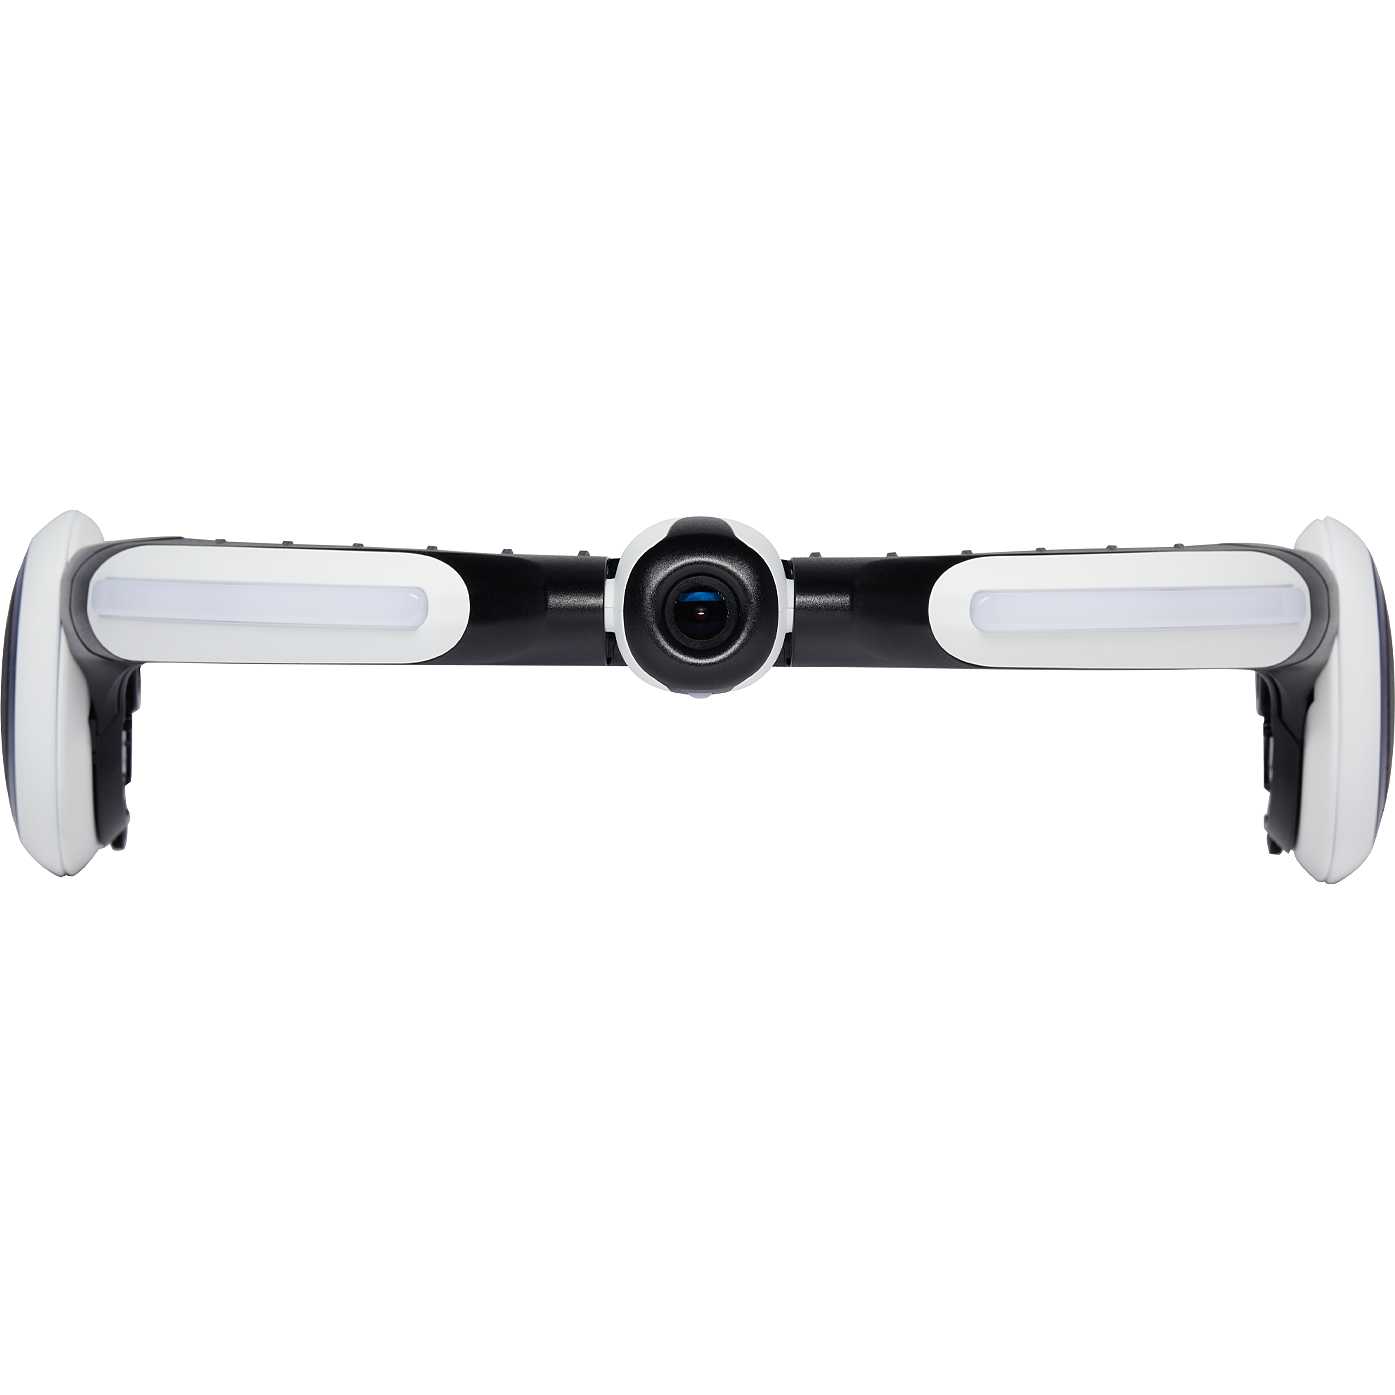 HJC ACTION CAMERA WITH PROJECTION ON THE SMART VISOR HJC - 10A | HJ33 PACKAGE